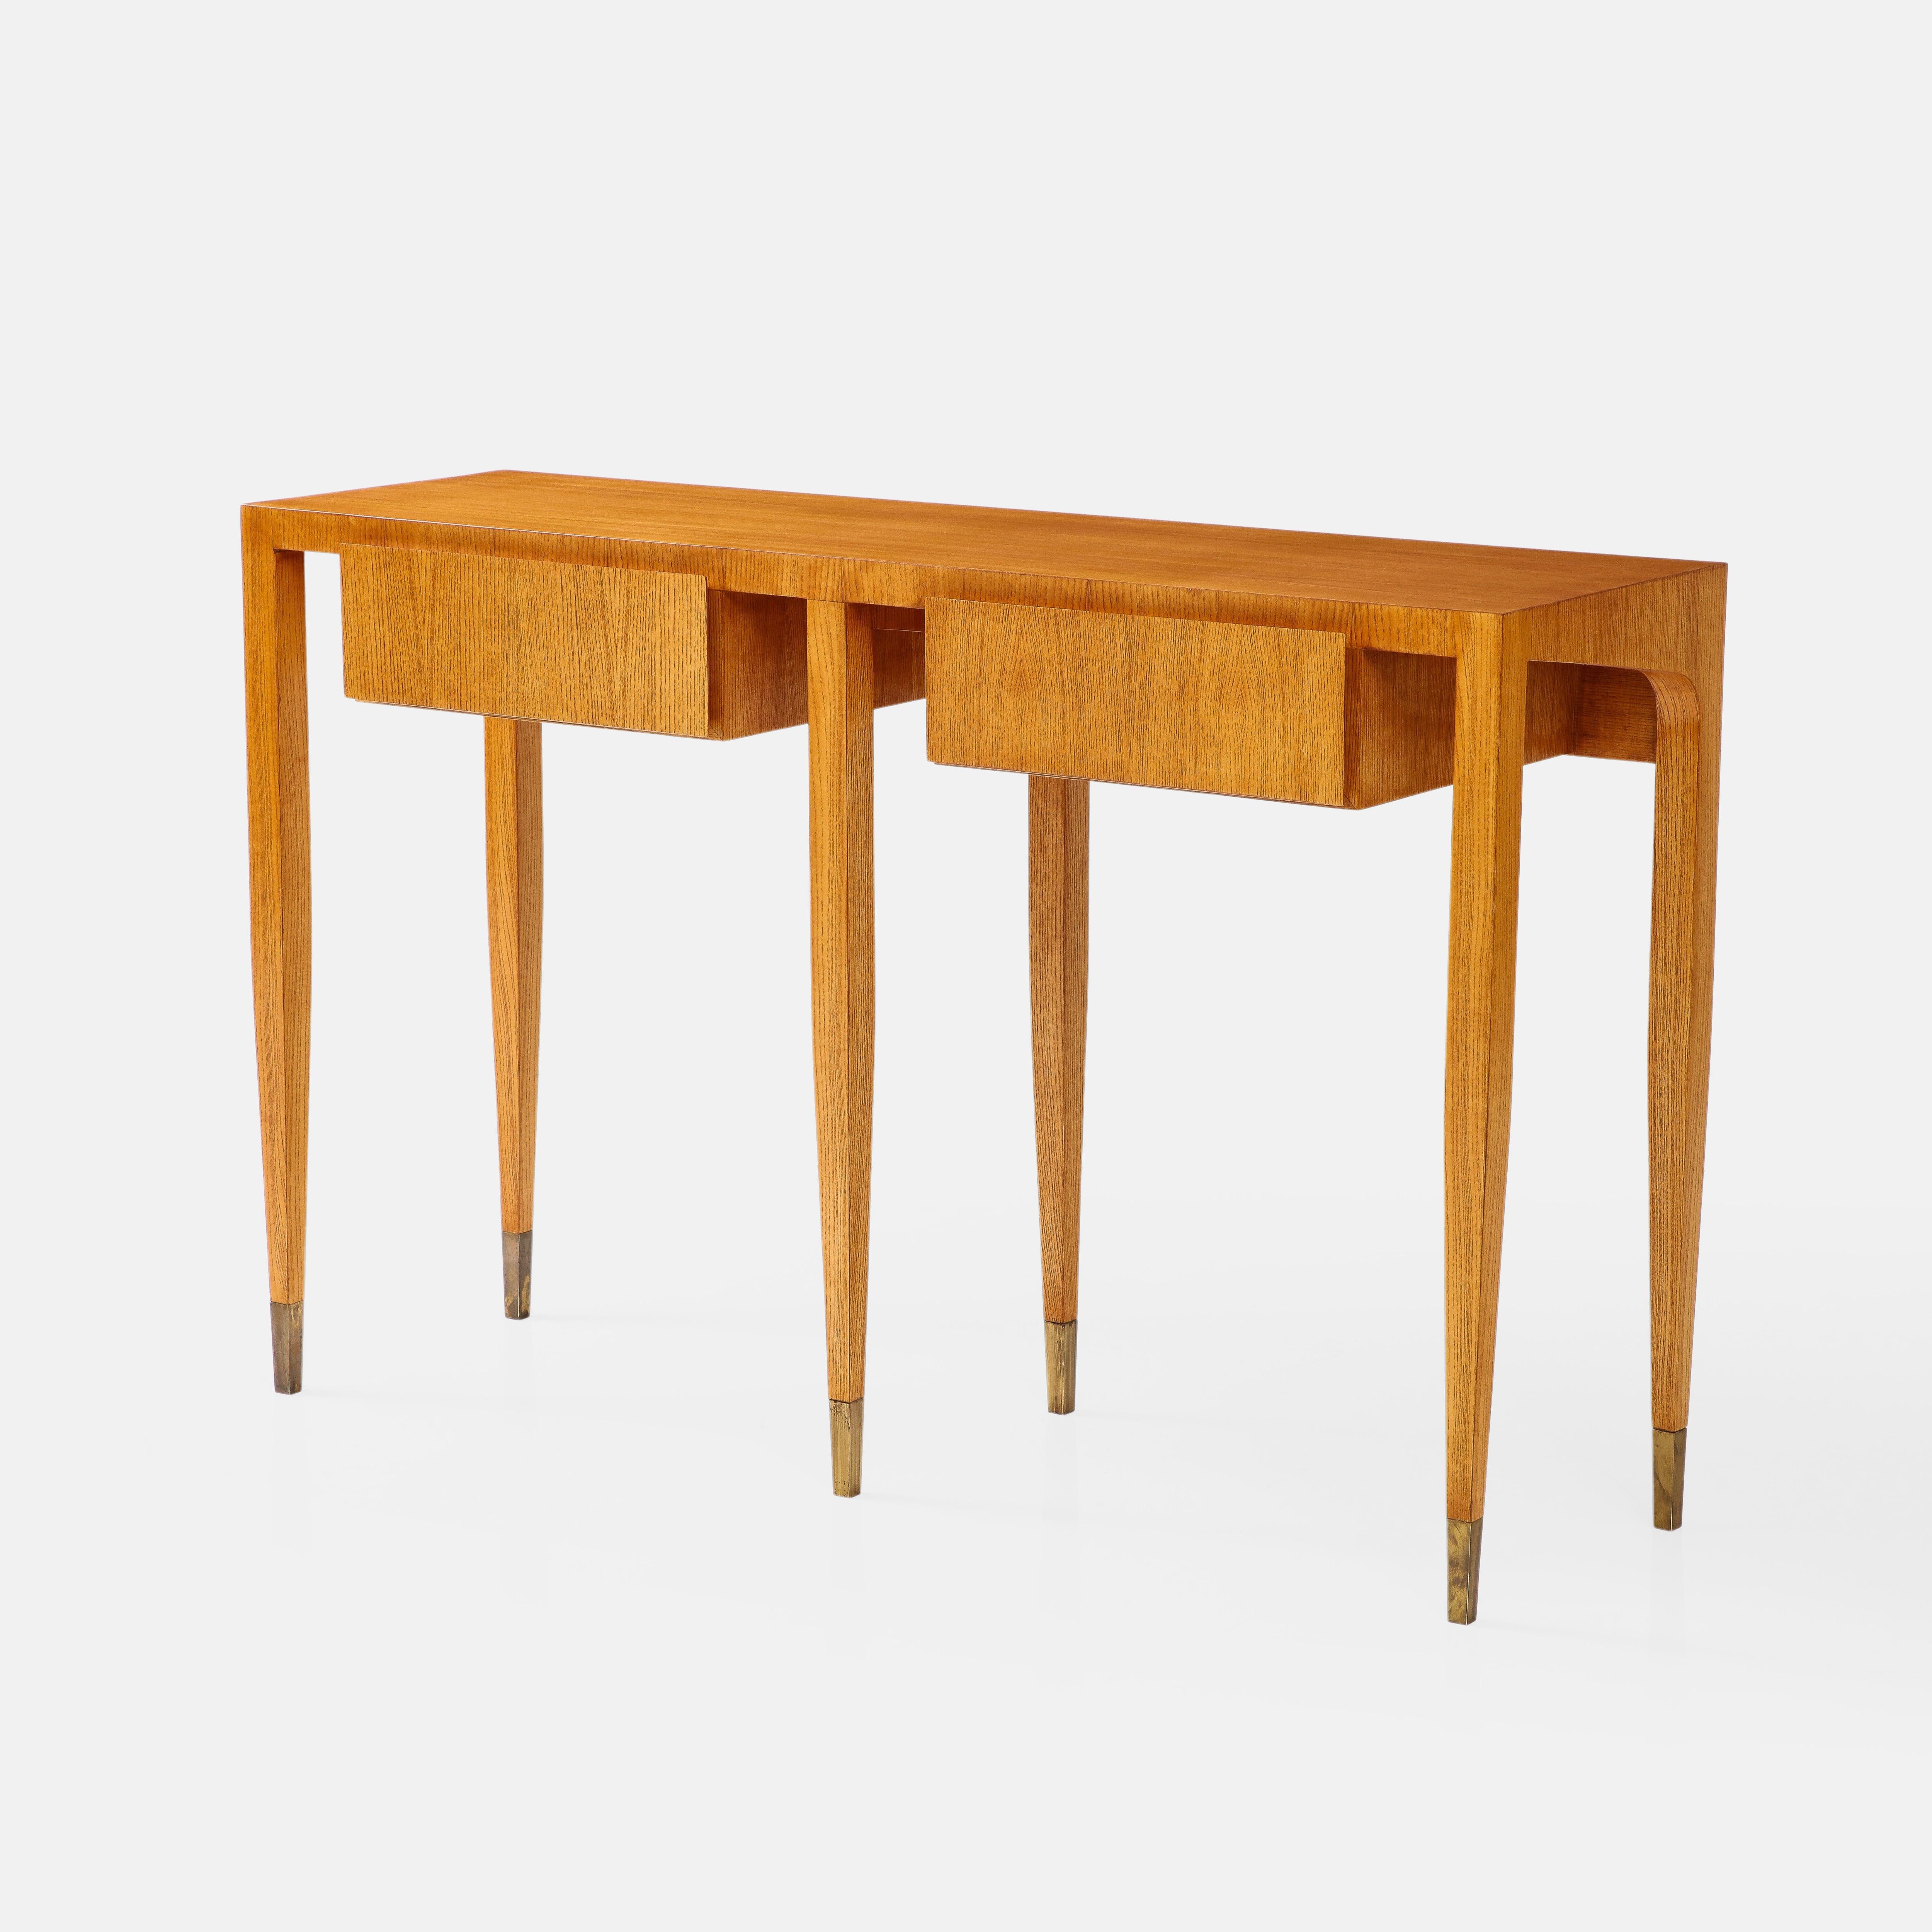 Gio Ponti for Giordano Chiesa rare and important ash wood console table with two drawers and six legs ending in brass sabots, Italy, circa 1955. This exquisite sculptural console has fine details throughout and clean architectural lines with cutout